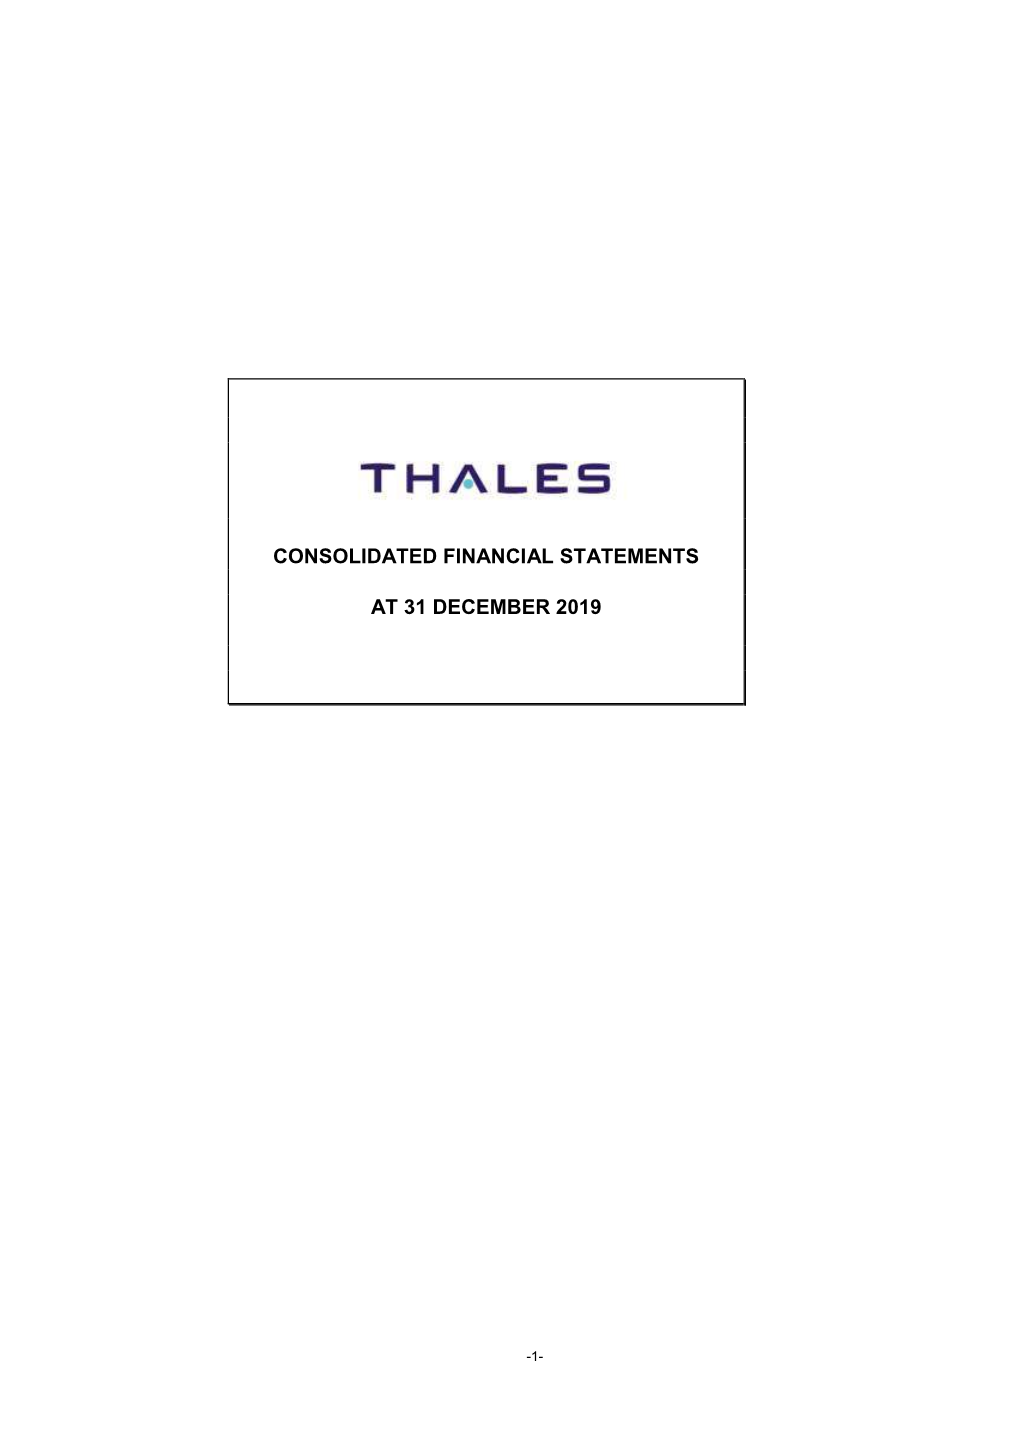 Consolidated Financial Statements at 31 December